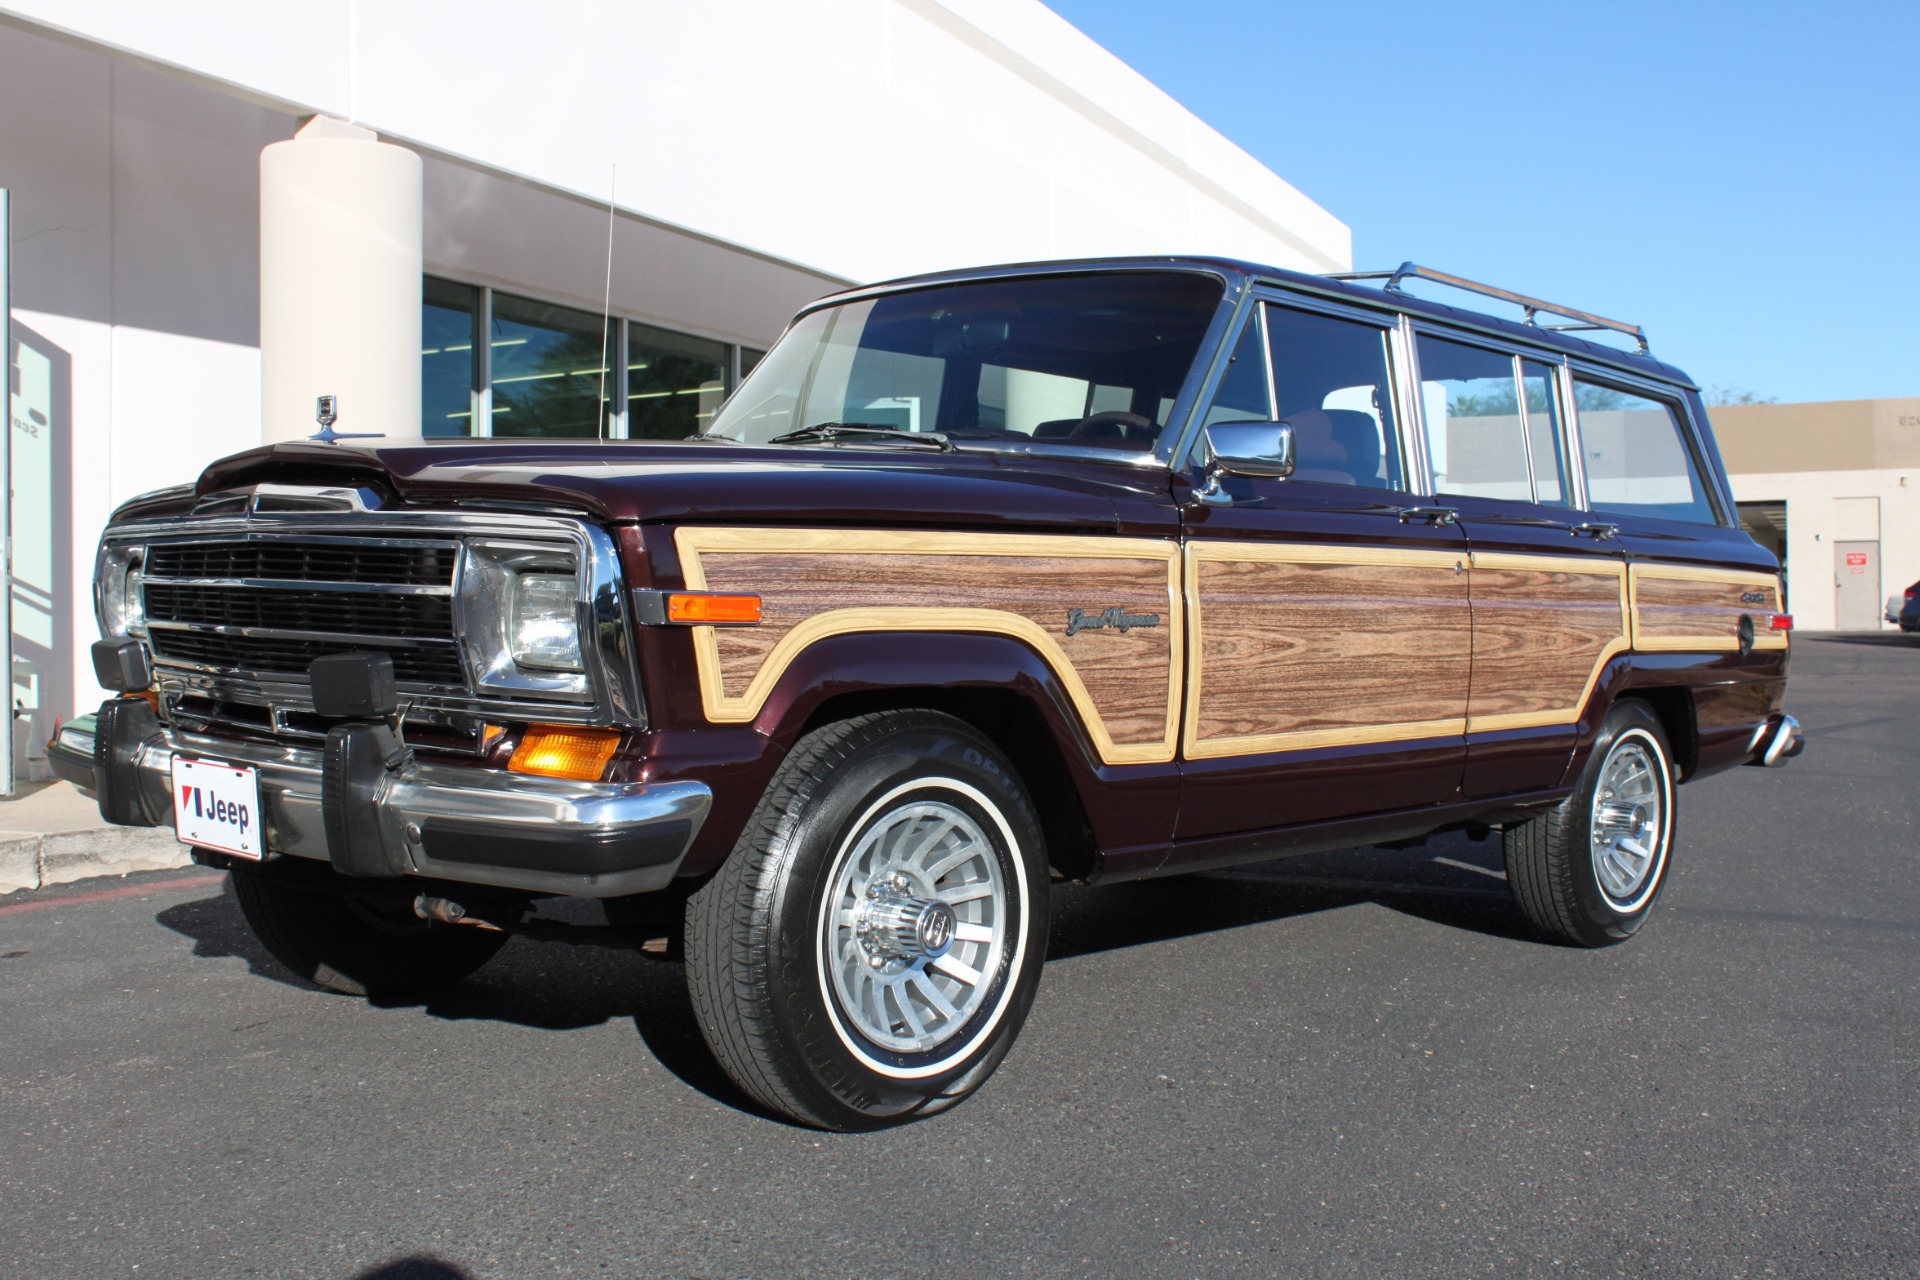 Used-1989-Jeep-Grand-Wagoneer-Land-Rover